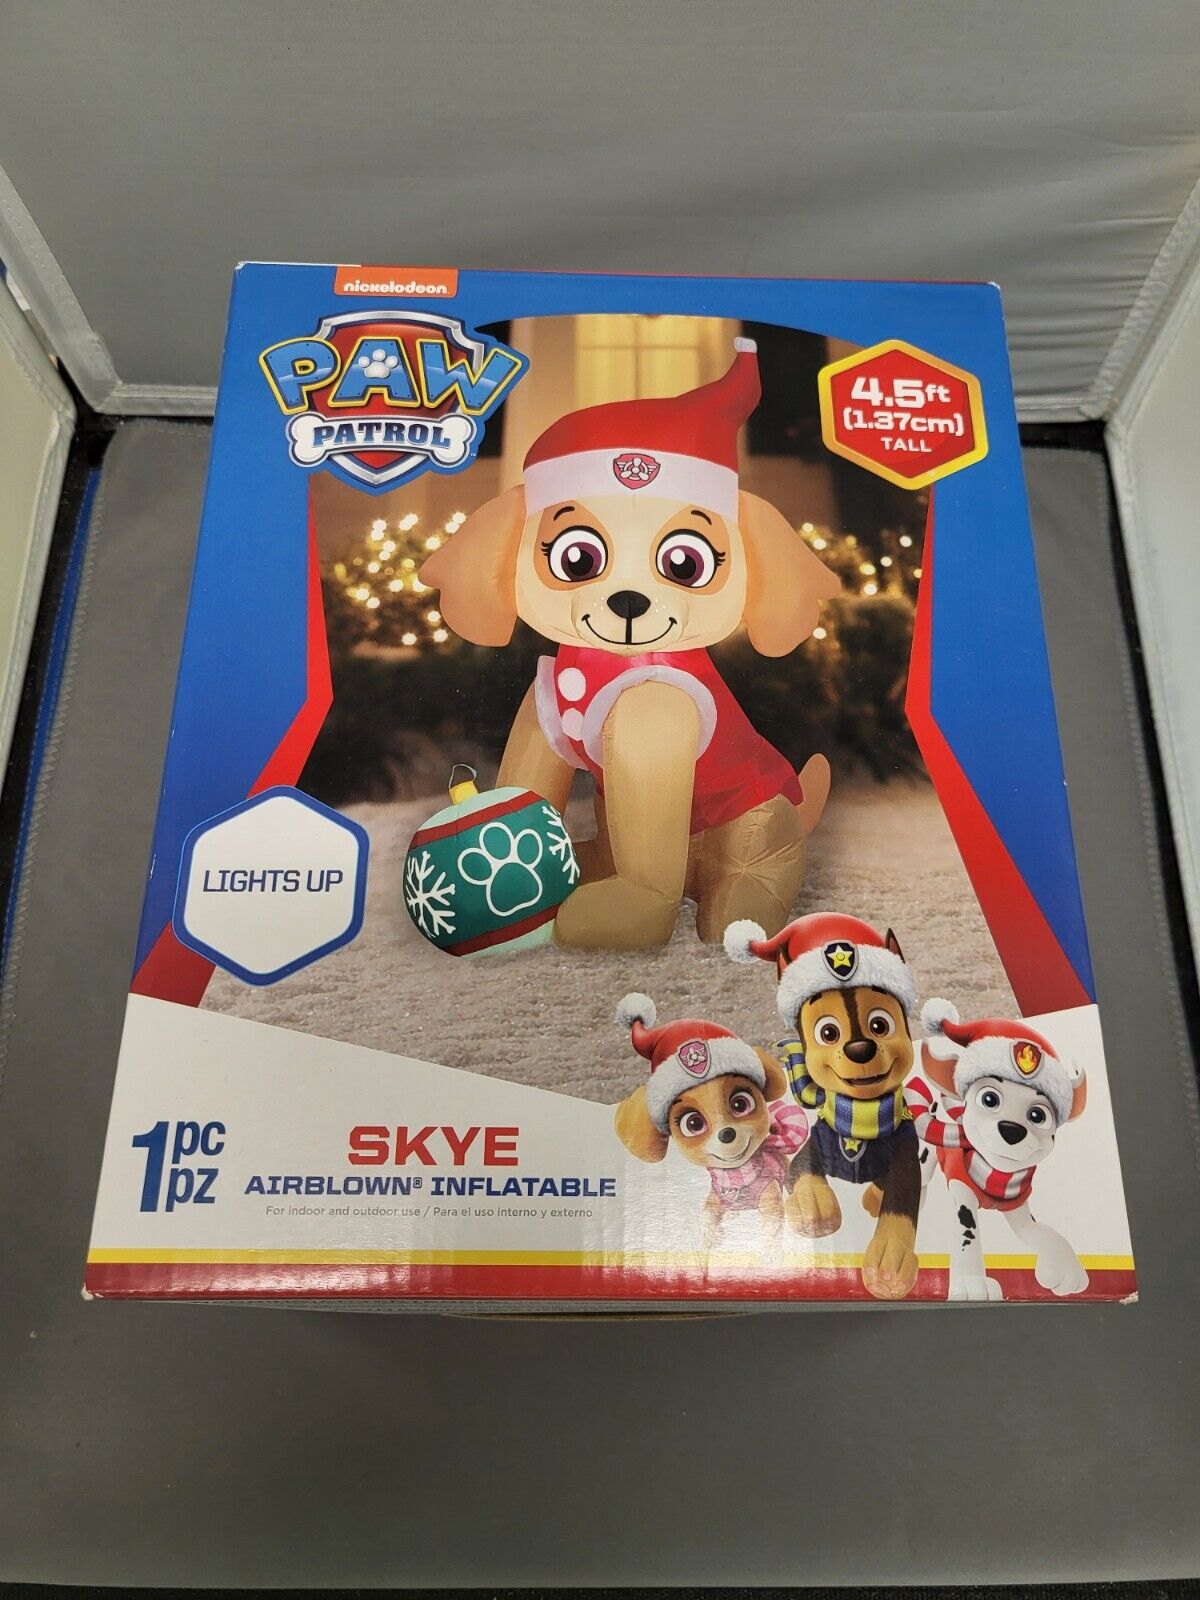 Paw Patrol Skye Light Up 4.5 Ft Airblown Inflatable Yard Decoration